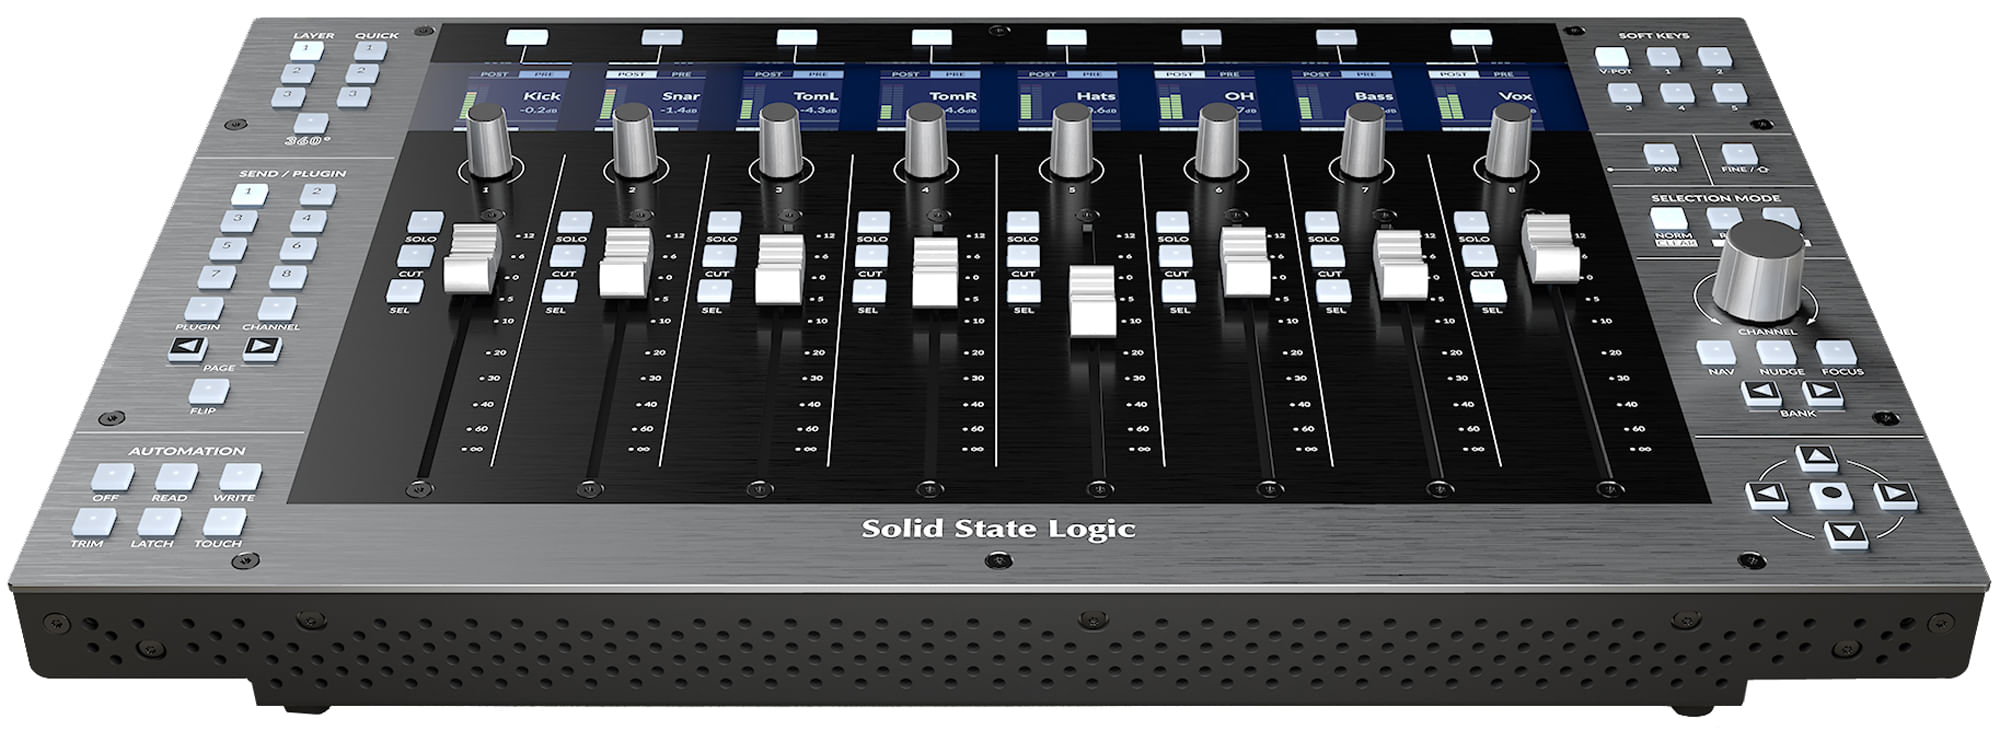 Solid State Logic UF8 Advanced DAW Controller - Cosmo Music